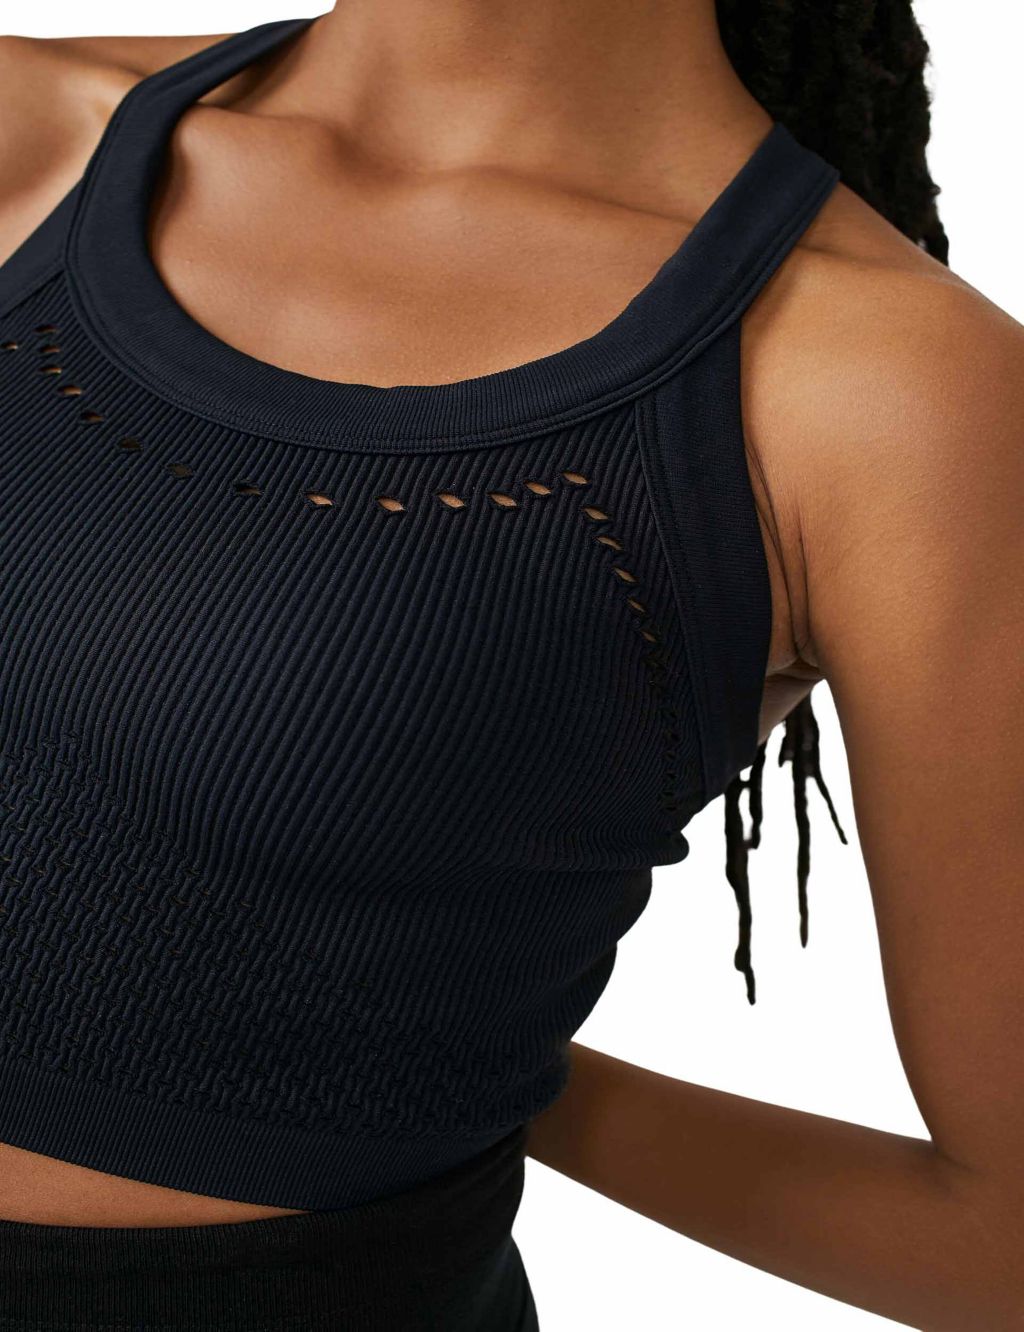 Serendipity Rib Knitted Twist Back Crop Top image 3